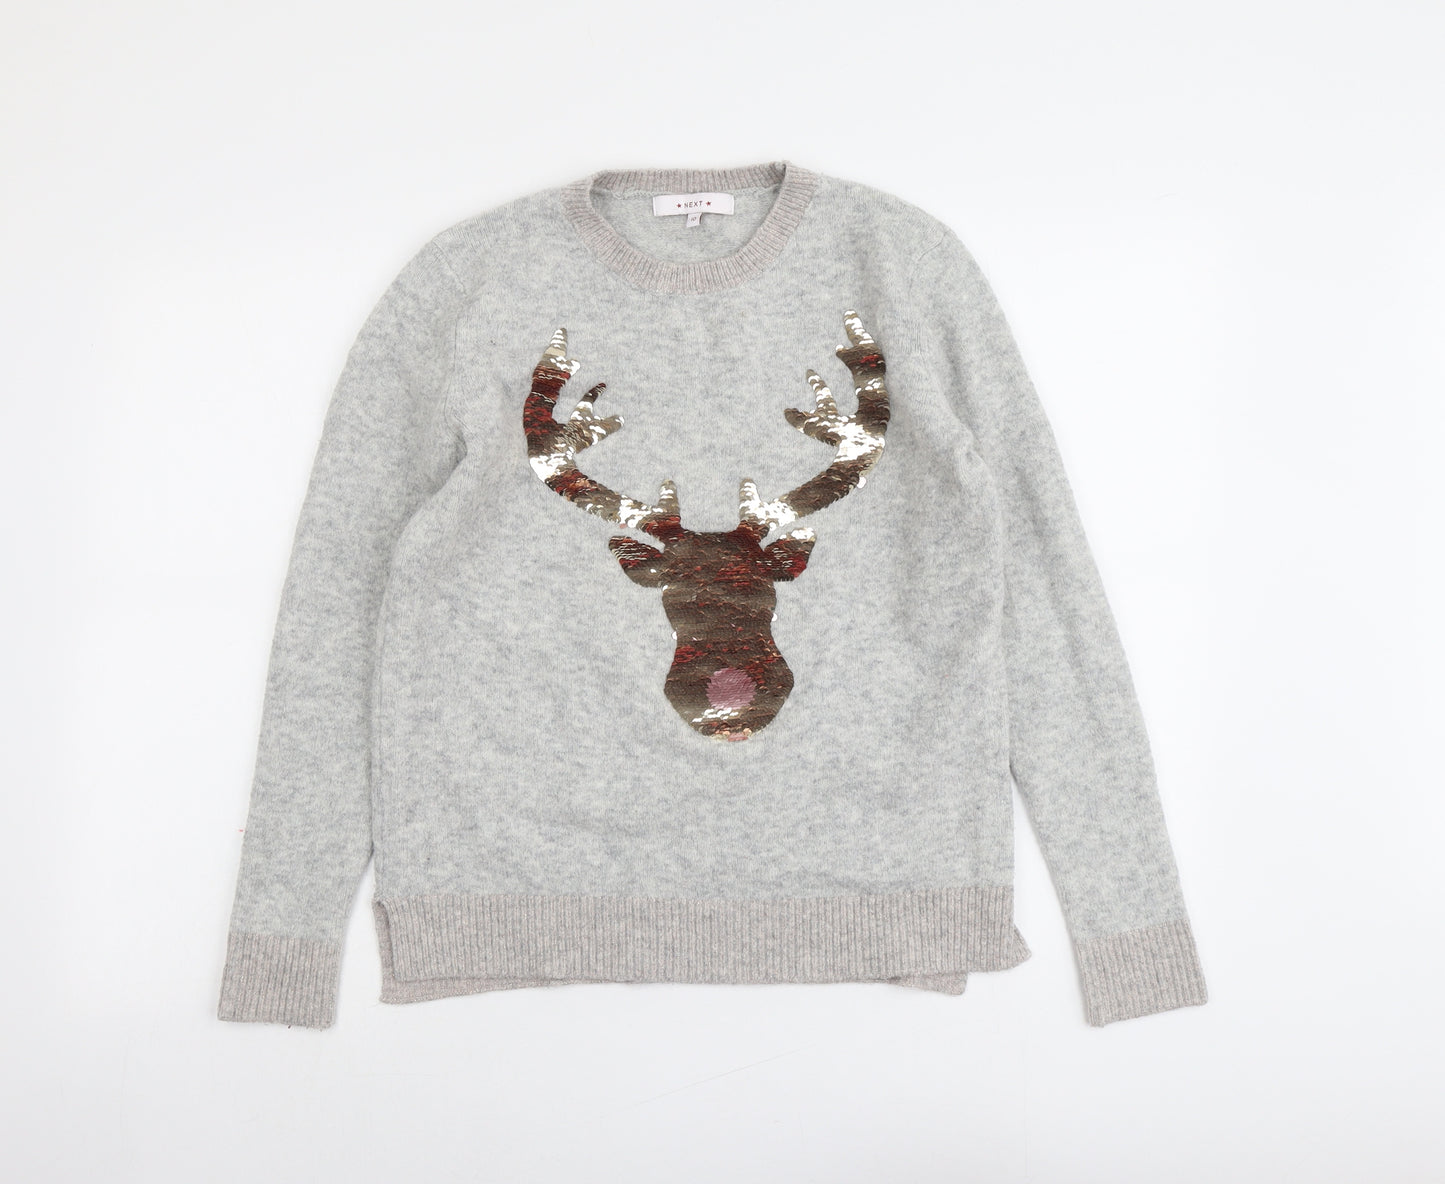 NEXT Womens Grey Round Neck Acrylic Pullover Jumper Size 10 - Reindeer Christmas